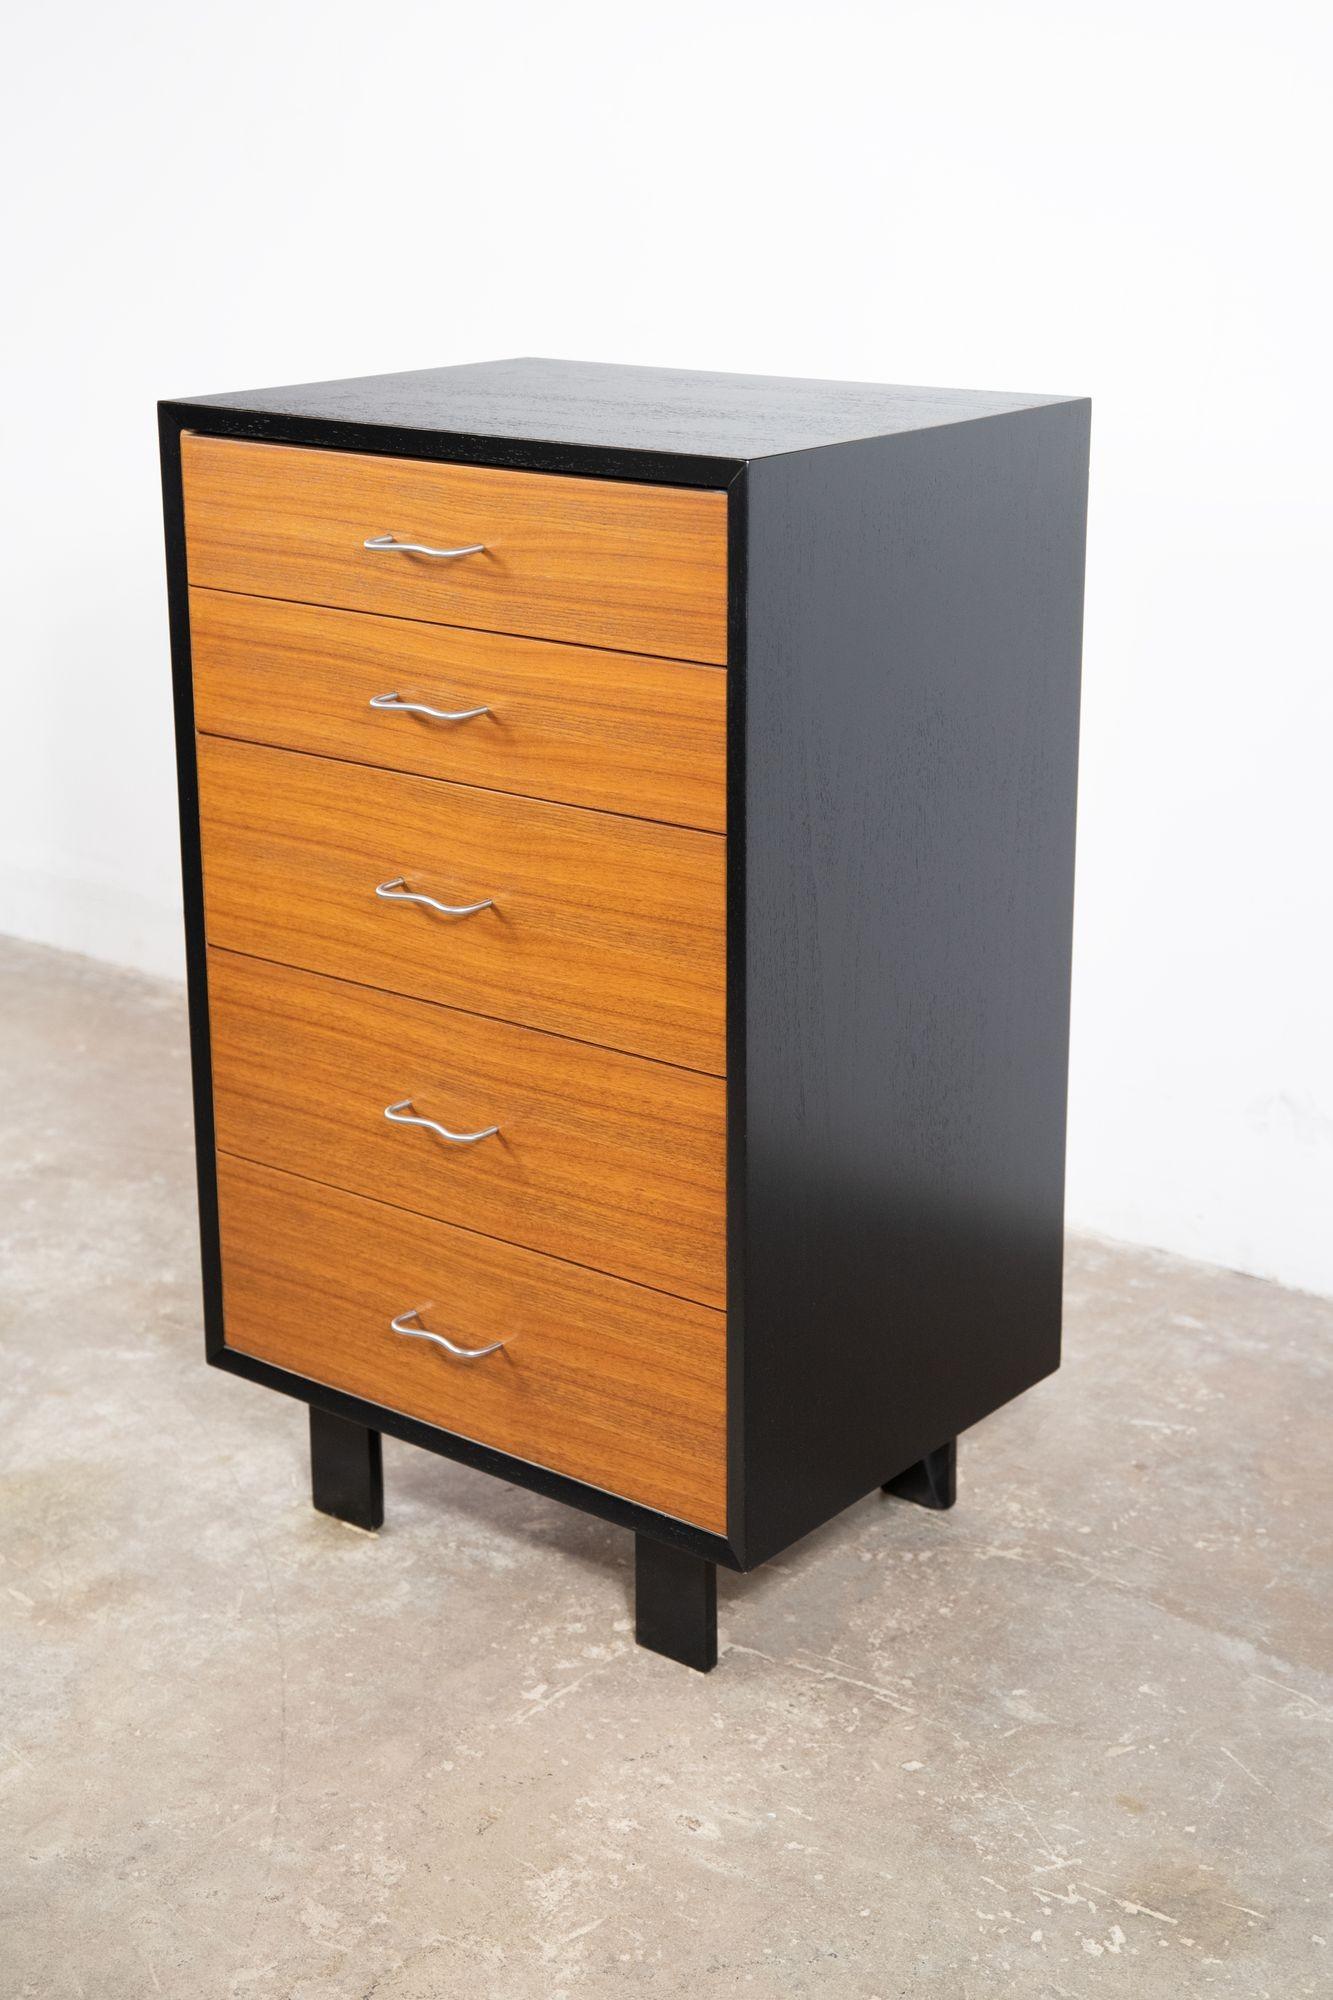 Five-drawer tall cabinet model 4610 with matching two-door server cabinet model 4625 designed by George Nelson for Herman Miller 1952. Both cabinets are in excellent restored condition and were in the dining room of an estate designed by architect